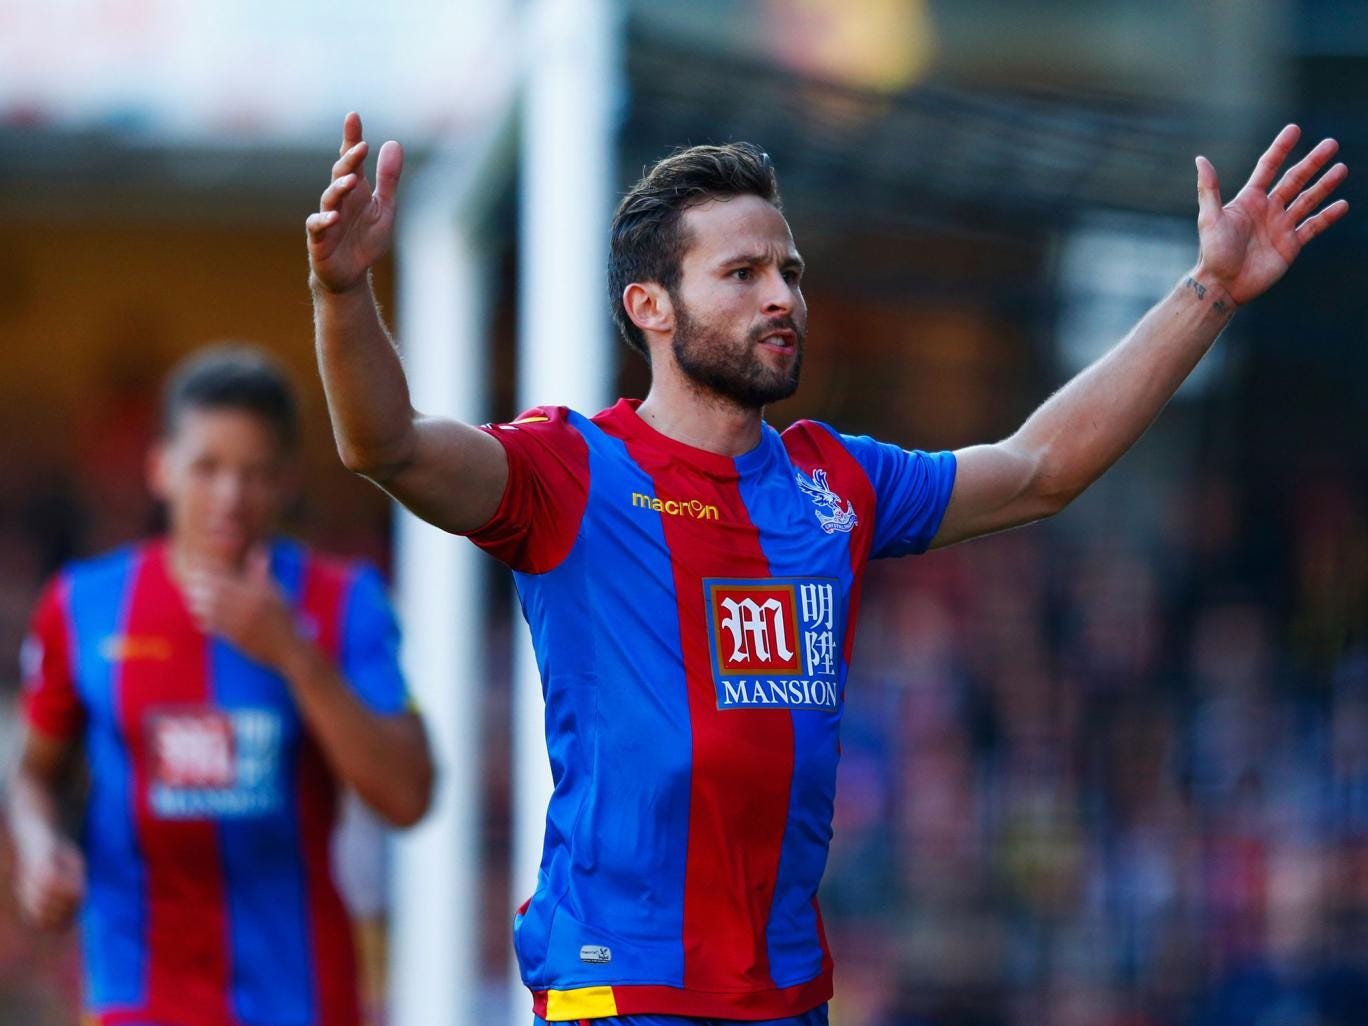 When will Crystal Palace crumble?